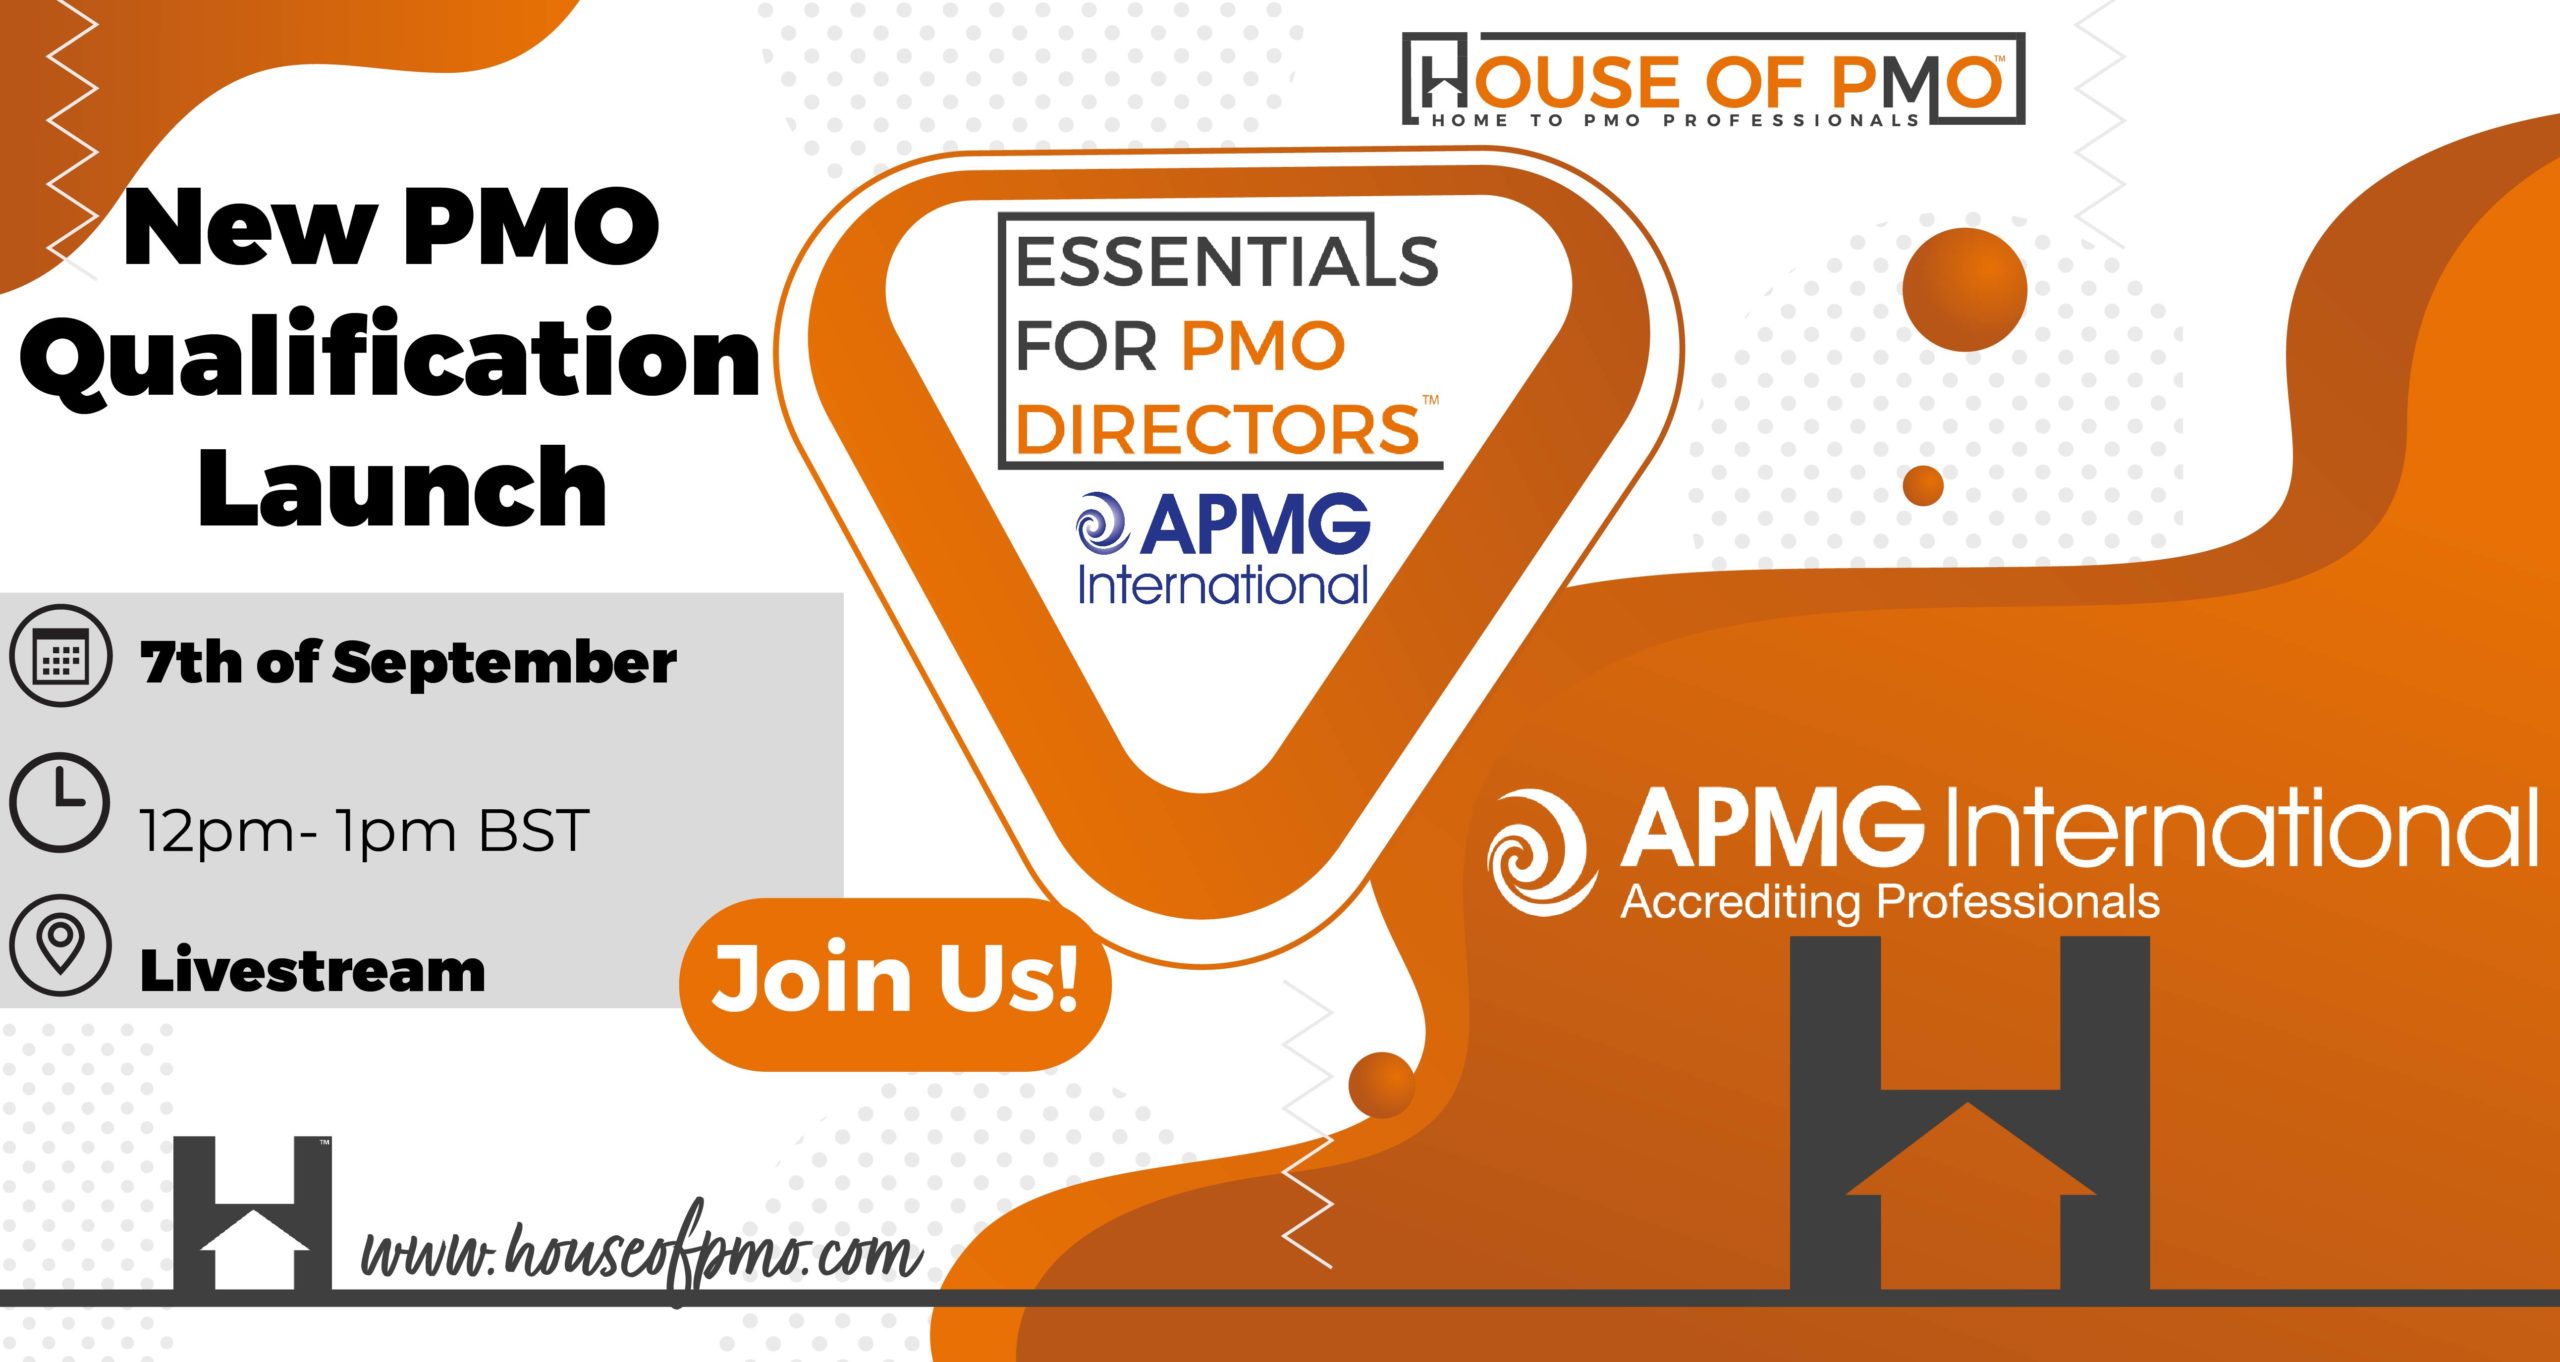 An image showing that the House of PMO is launching a new qualification with APMG which is the Essentials for PMO Directors Qualification. It will be taking place virtually on the 7th of September at 12pm.